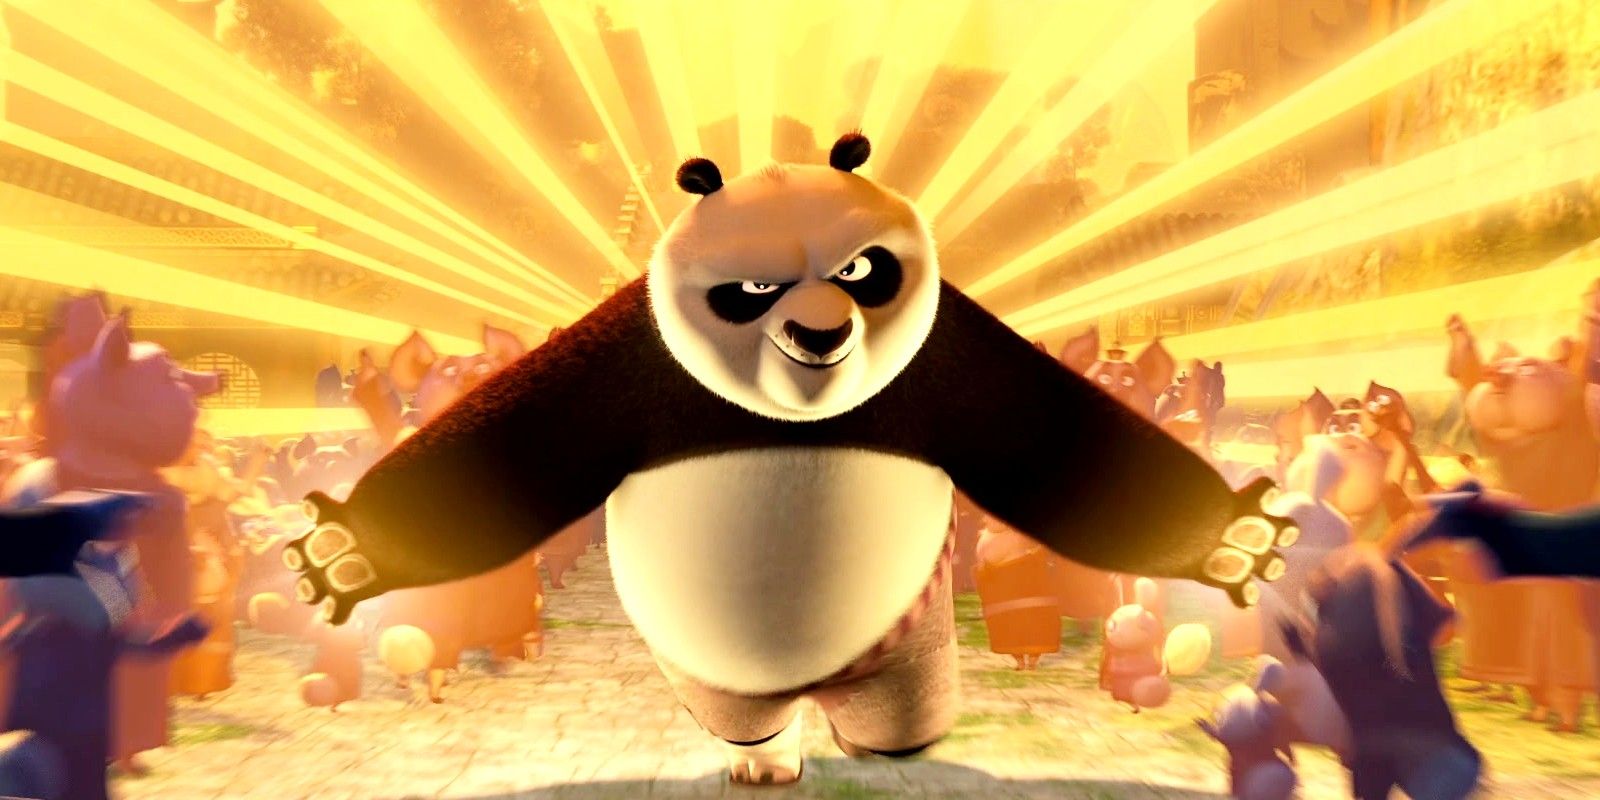 Po glowing with his powers in Kung Fu Panda 3